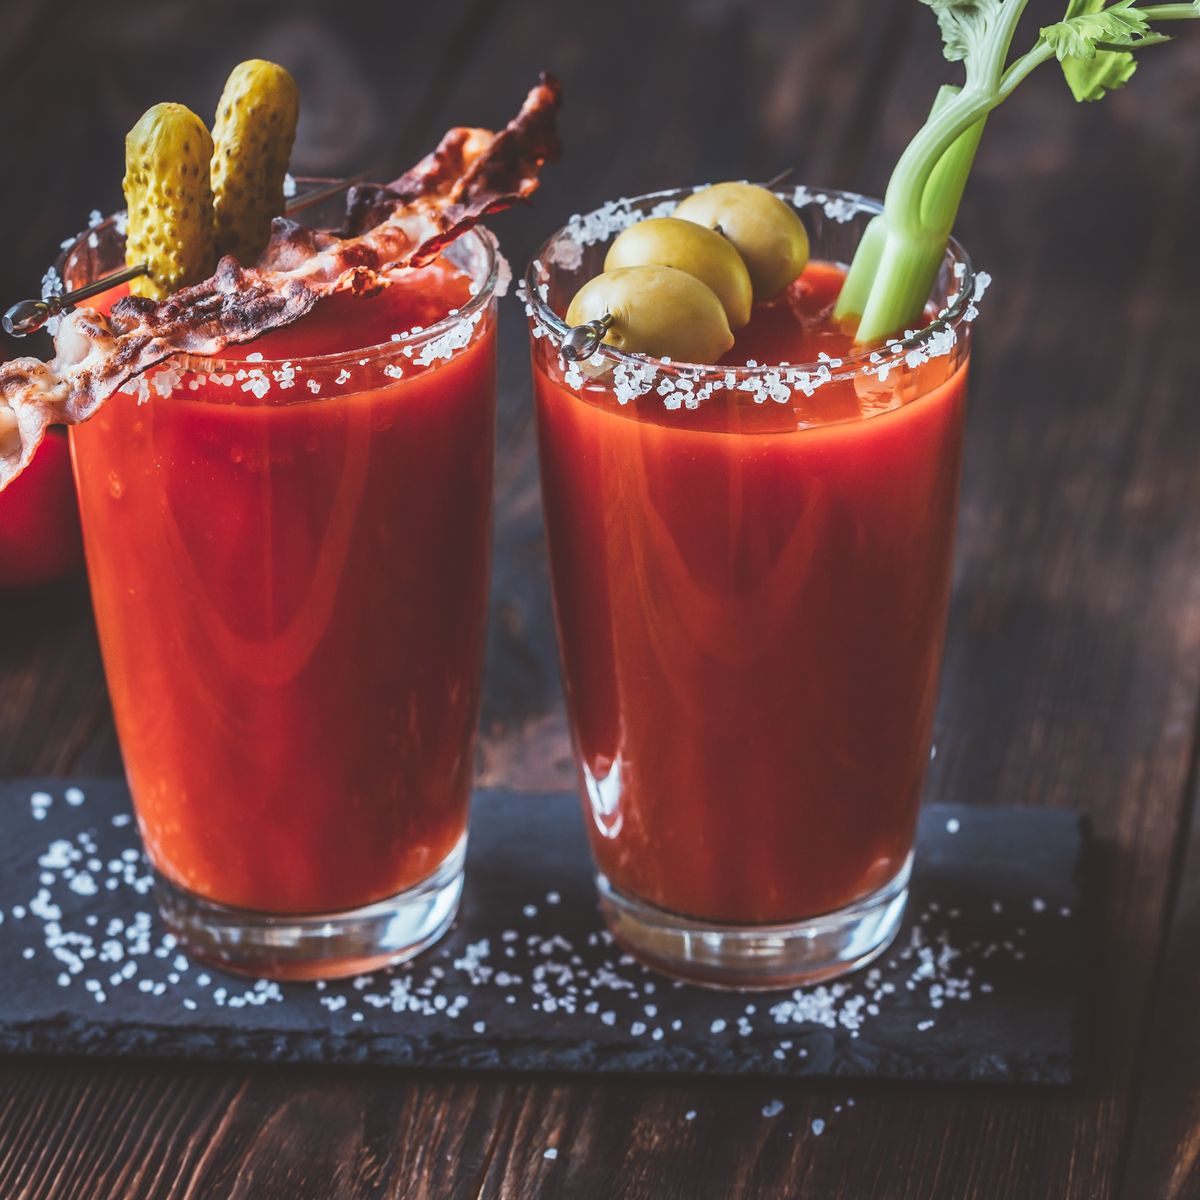 Best Bloody Mary Recipe - How To Make The Perfect Bloody Mary